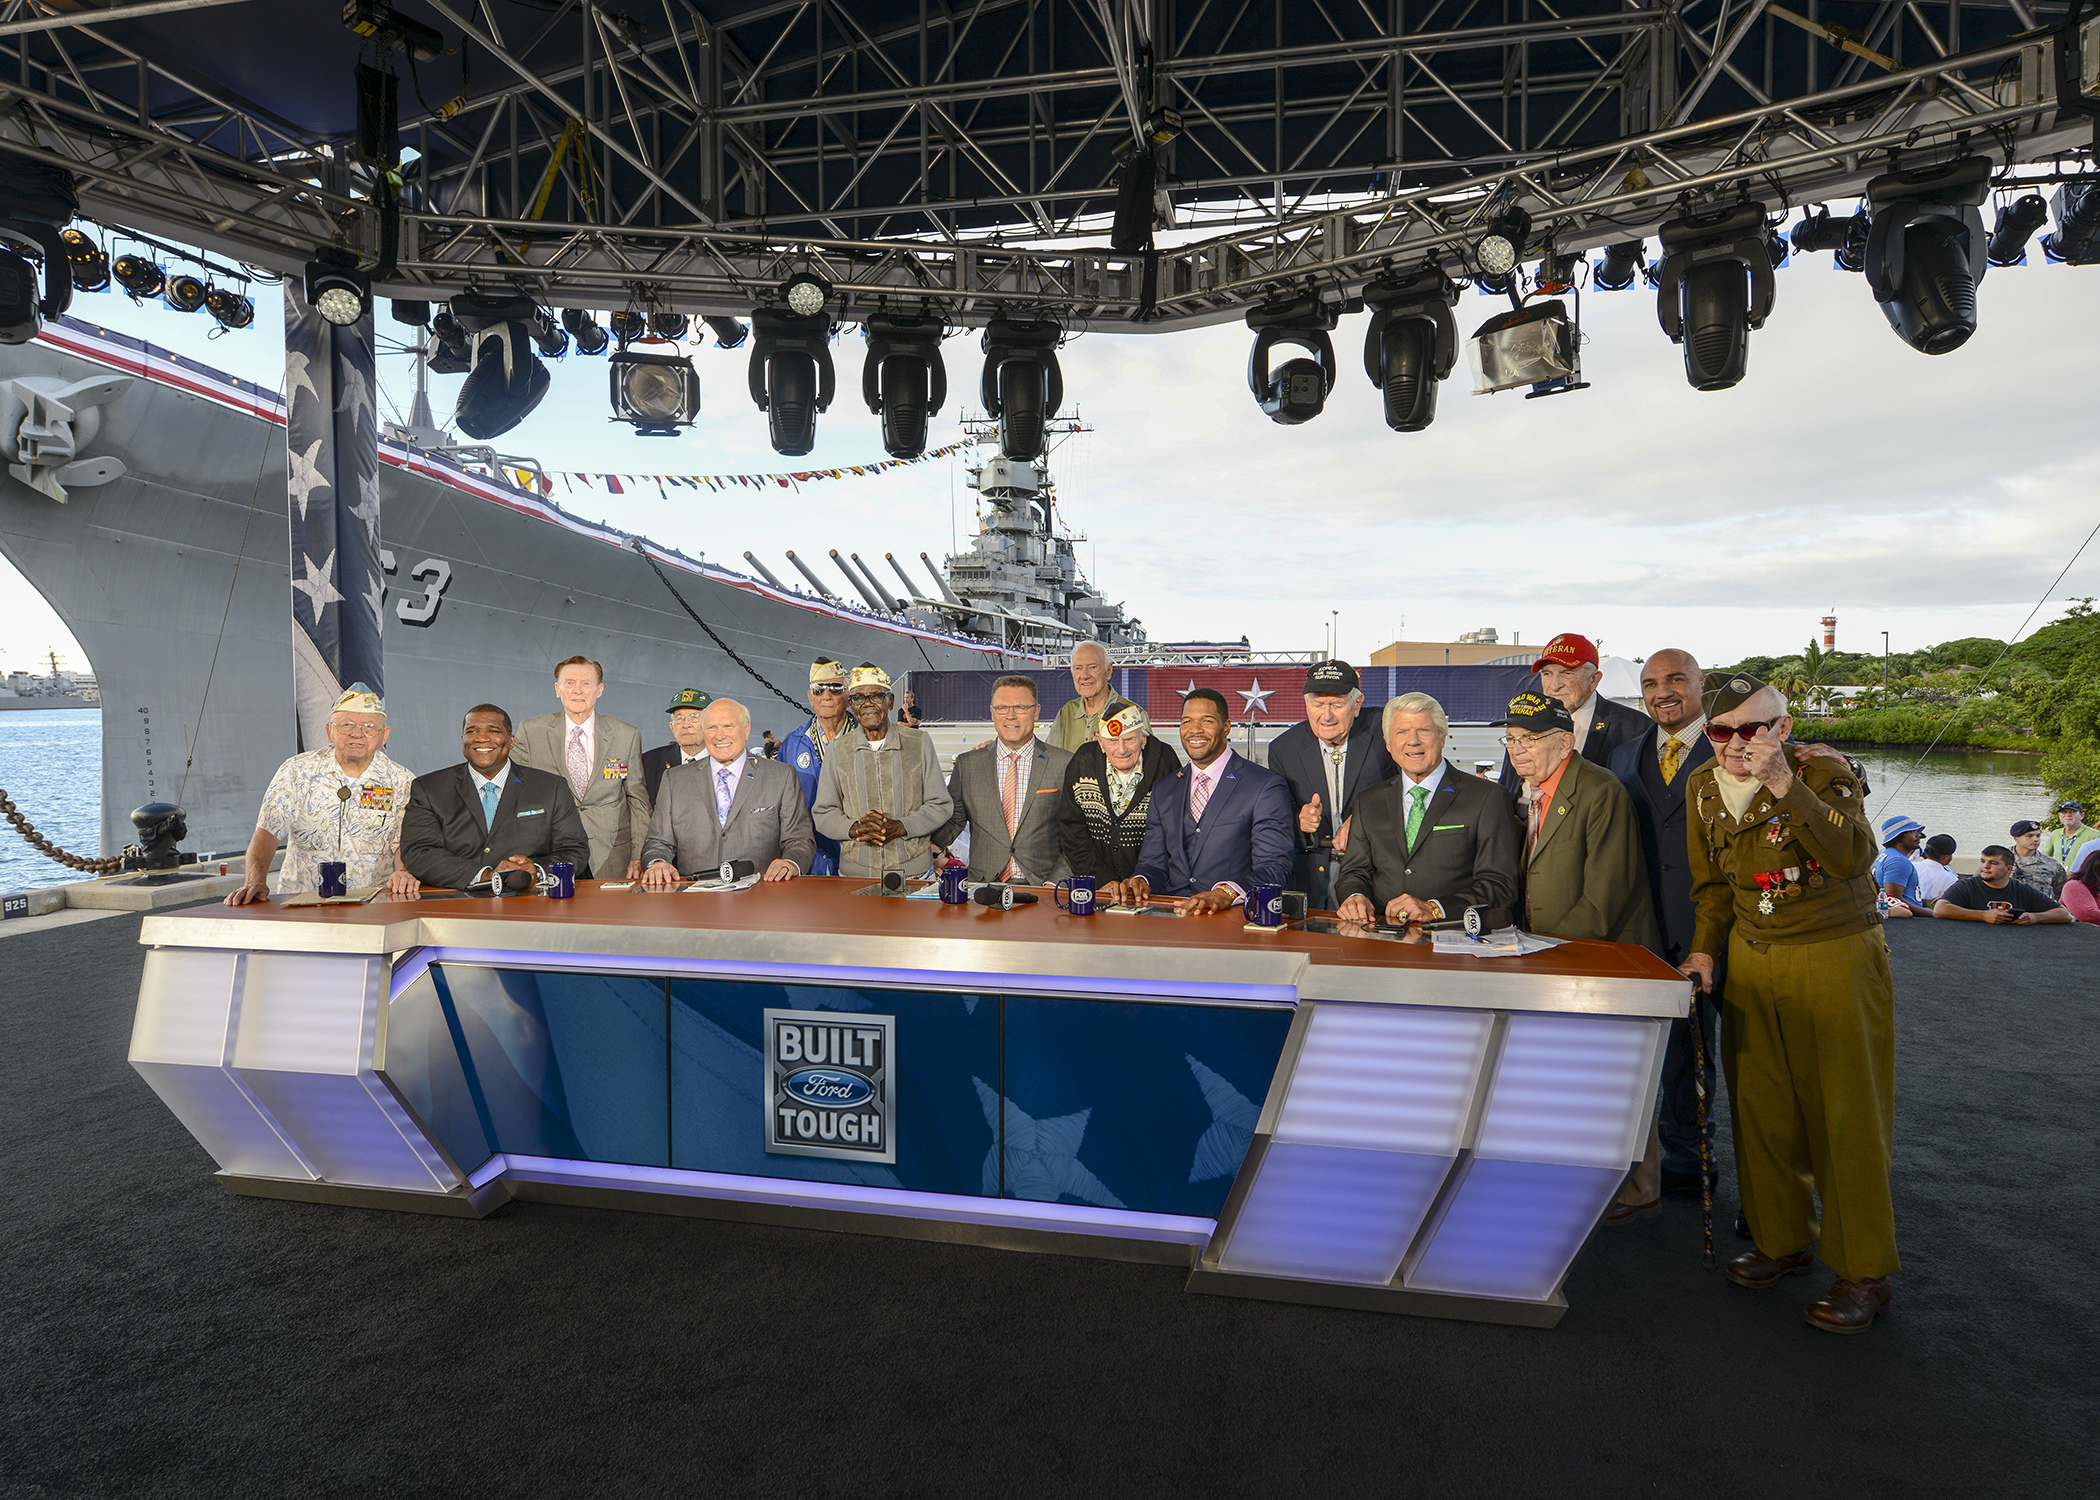 Dr. E. Bruce Heilman, back row on the right in the red hat, the hosts of FOX NFL Sunday Live, service members and Pearl Harbor survivors pose for a photo during FOX NFL Sunday Live Special